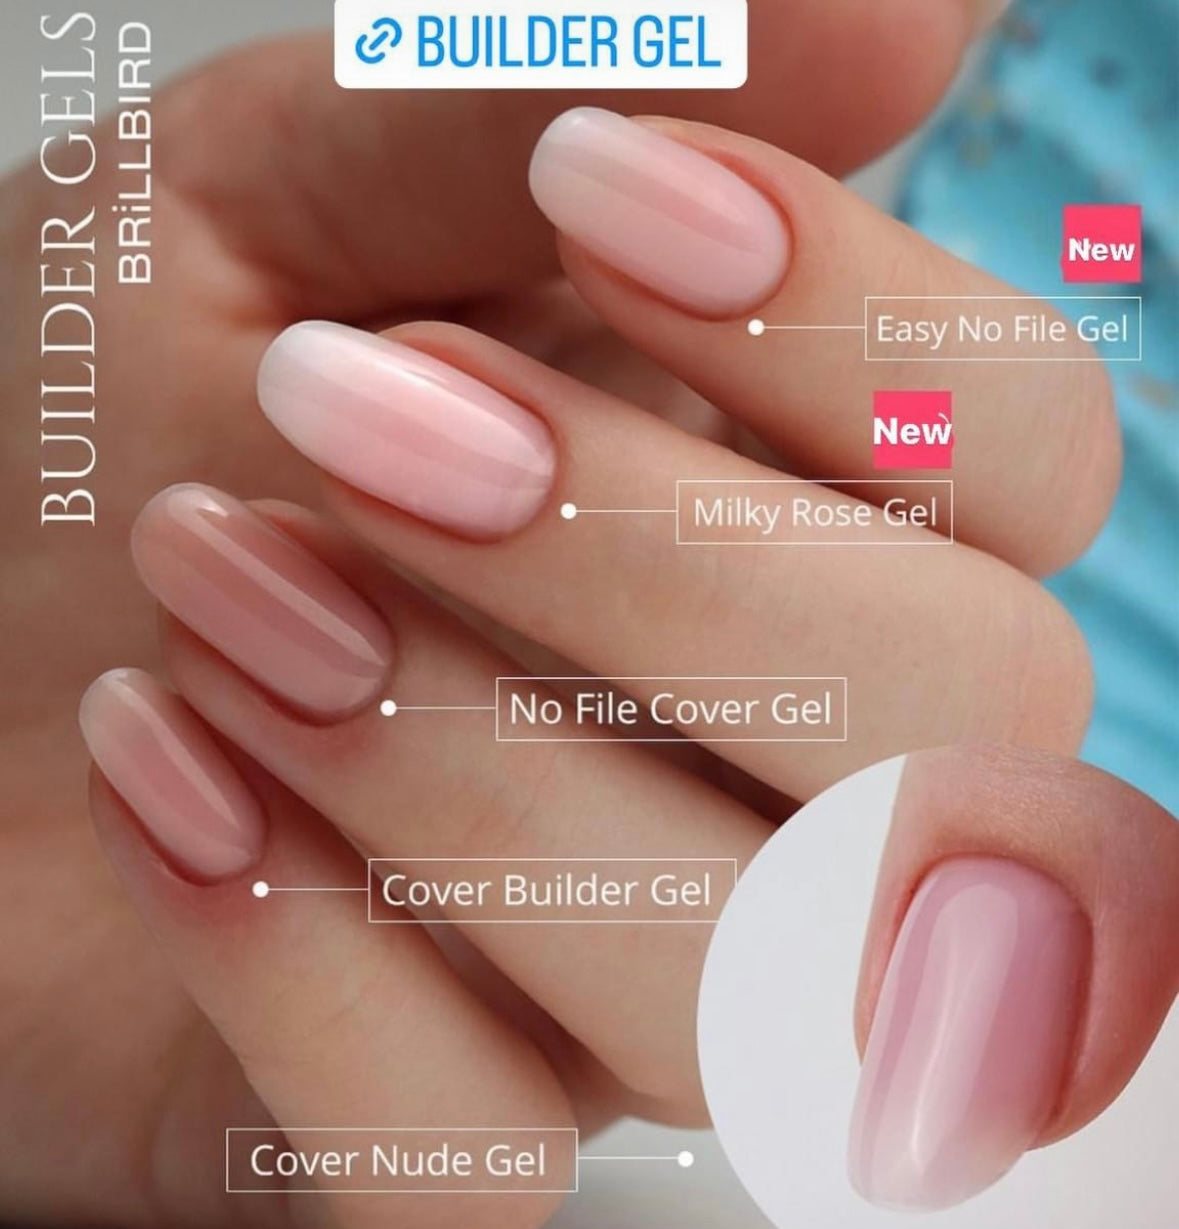 HOW TO APPLY BUILDER GEL NAILS STEP BY STEP + Easy Chrome Nail Art - YouTube